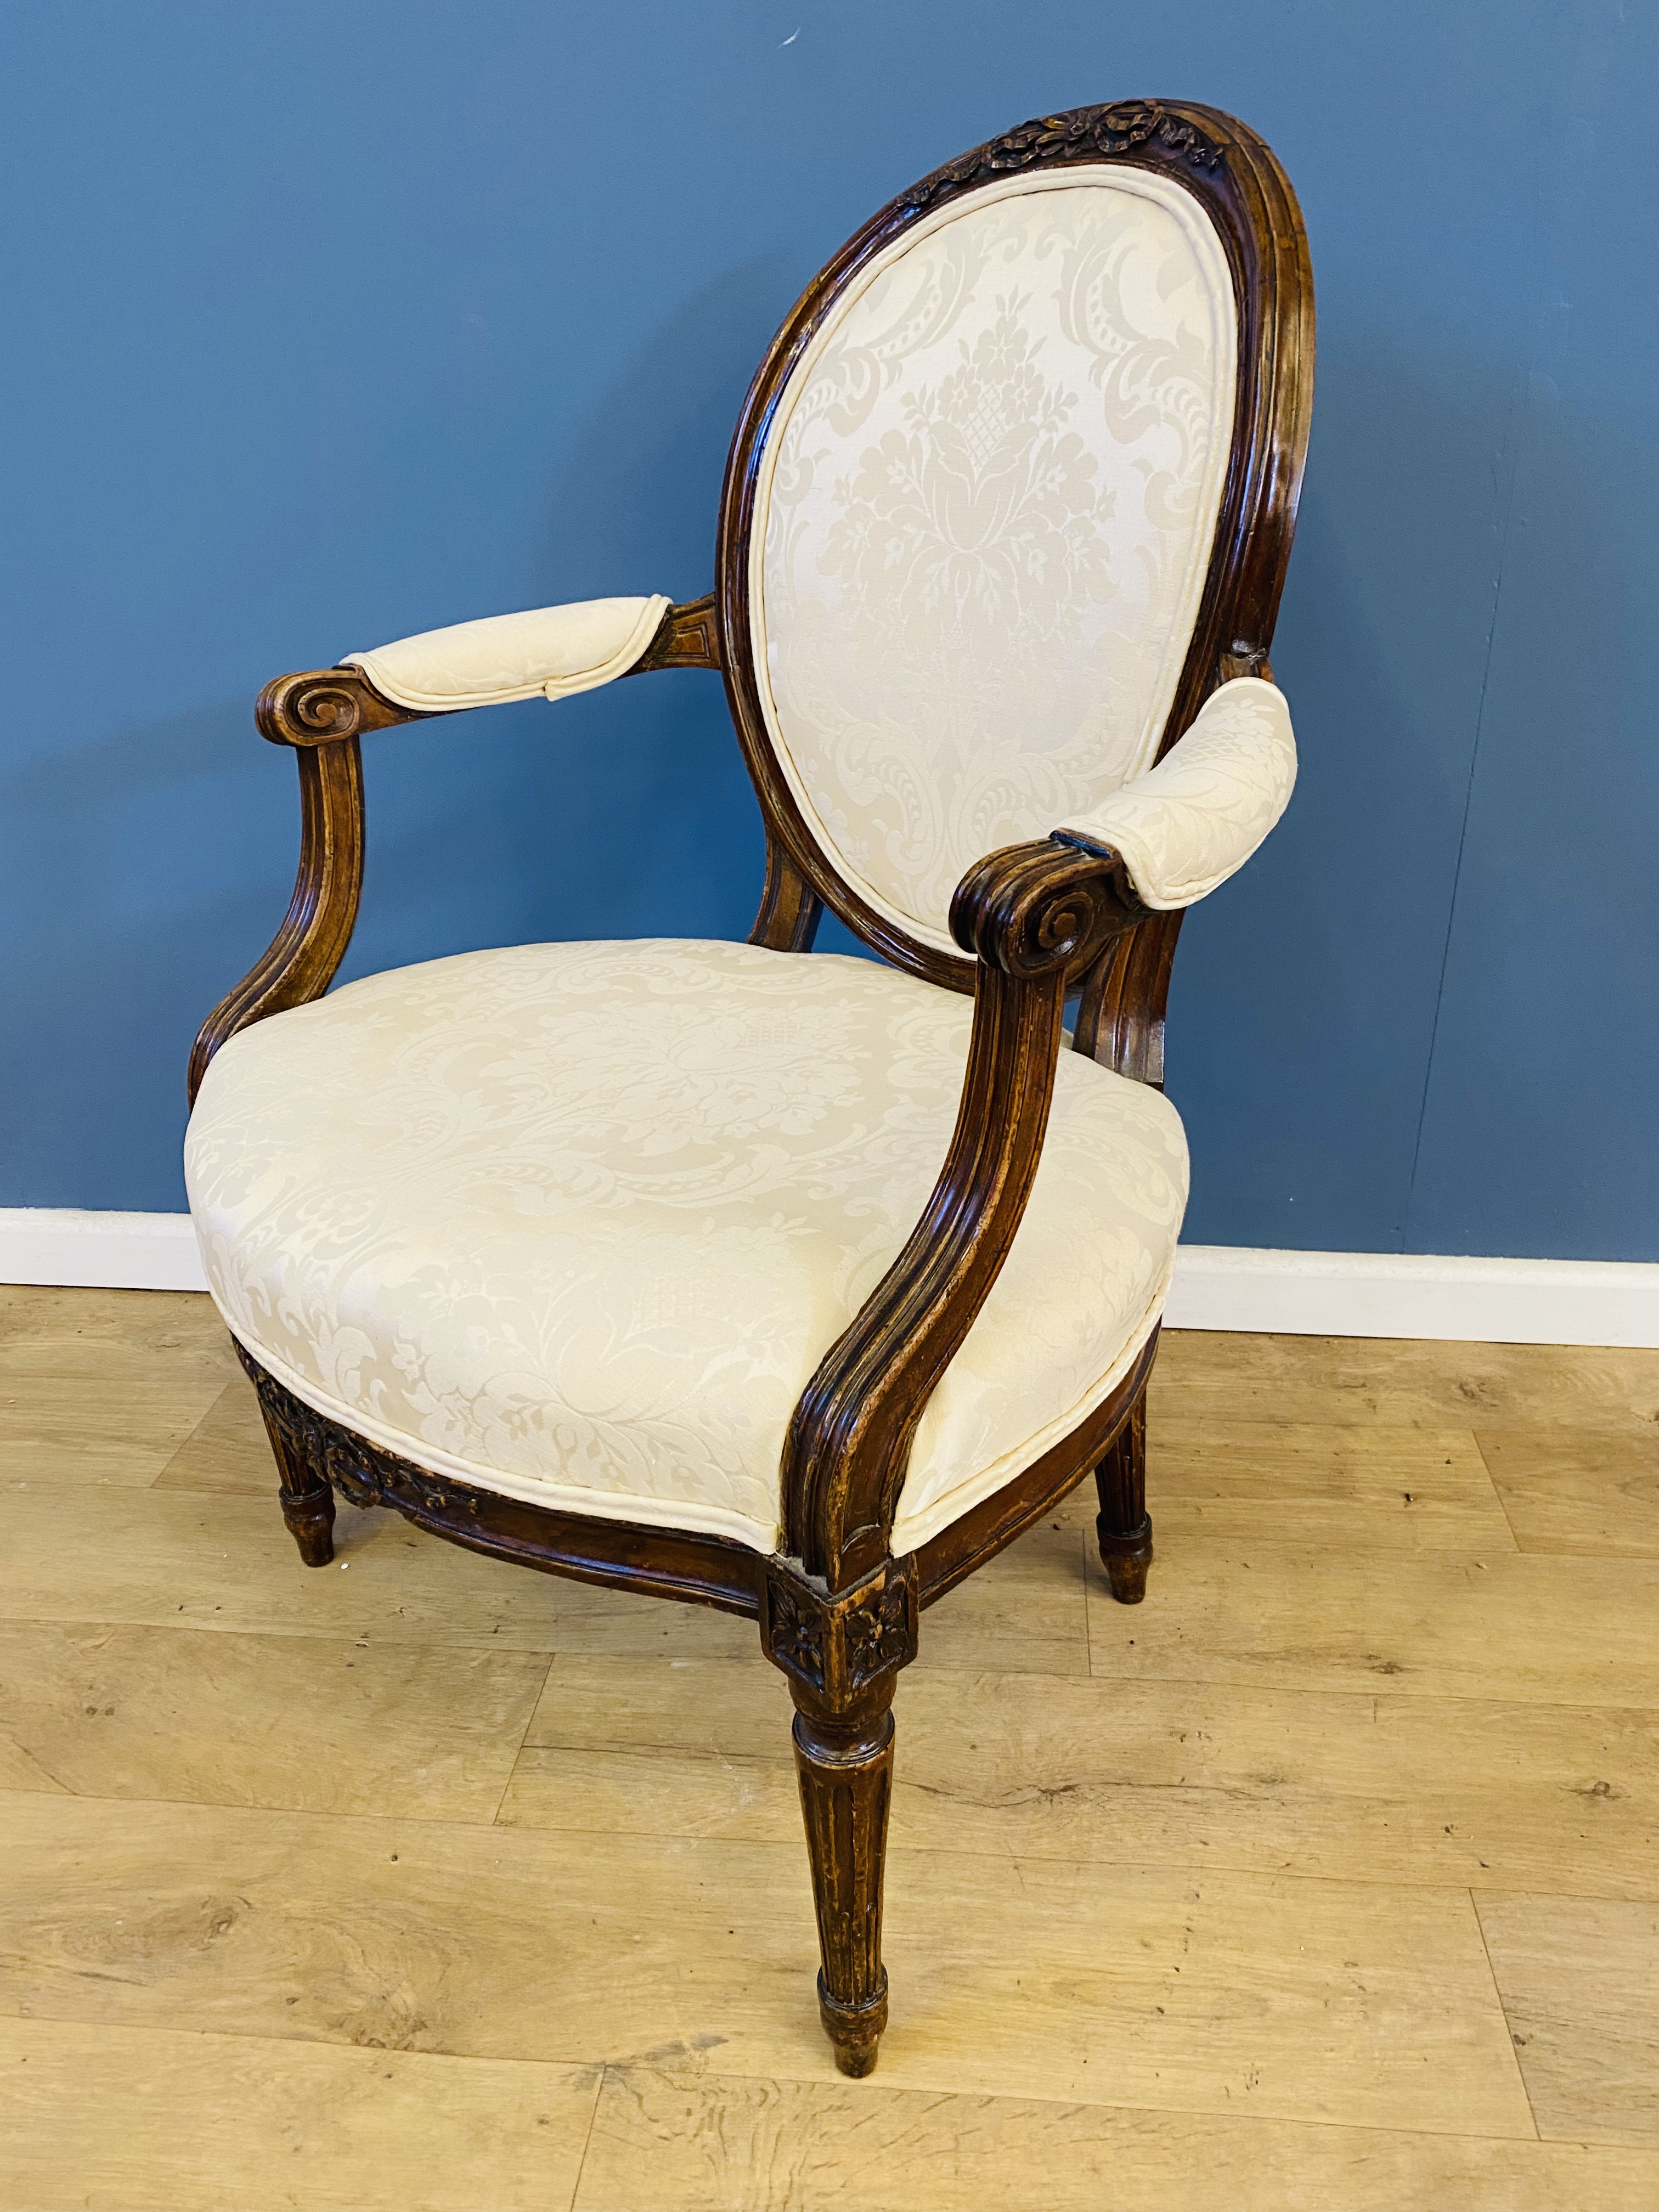 Early 20th century walnut open armchair - Image 2 of 5